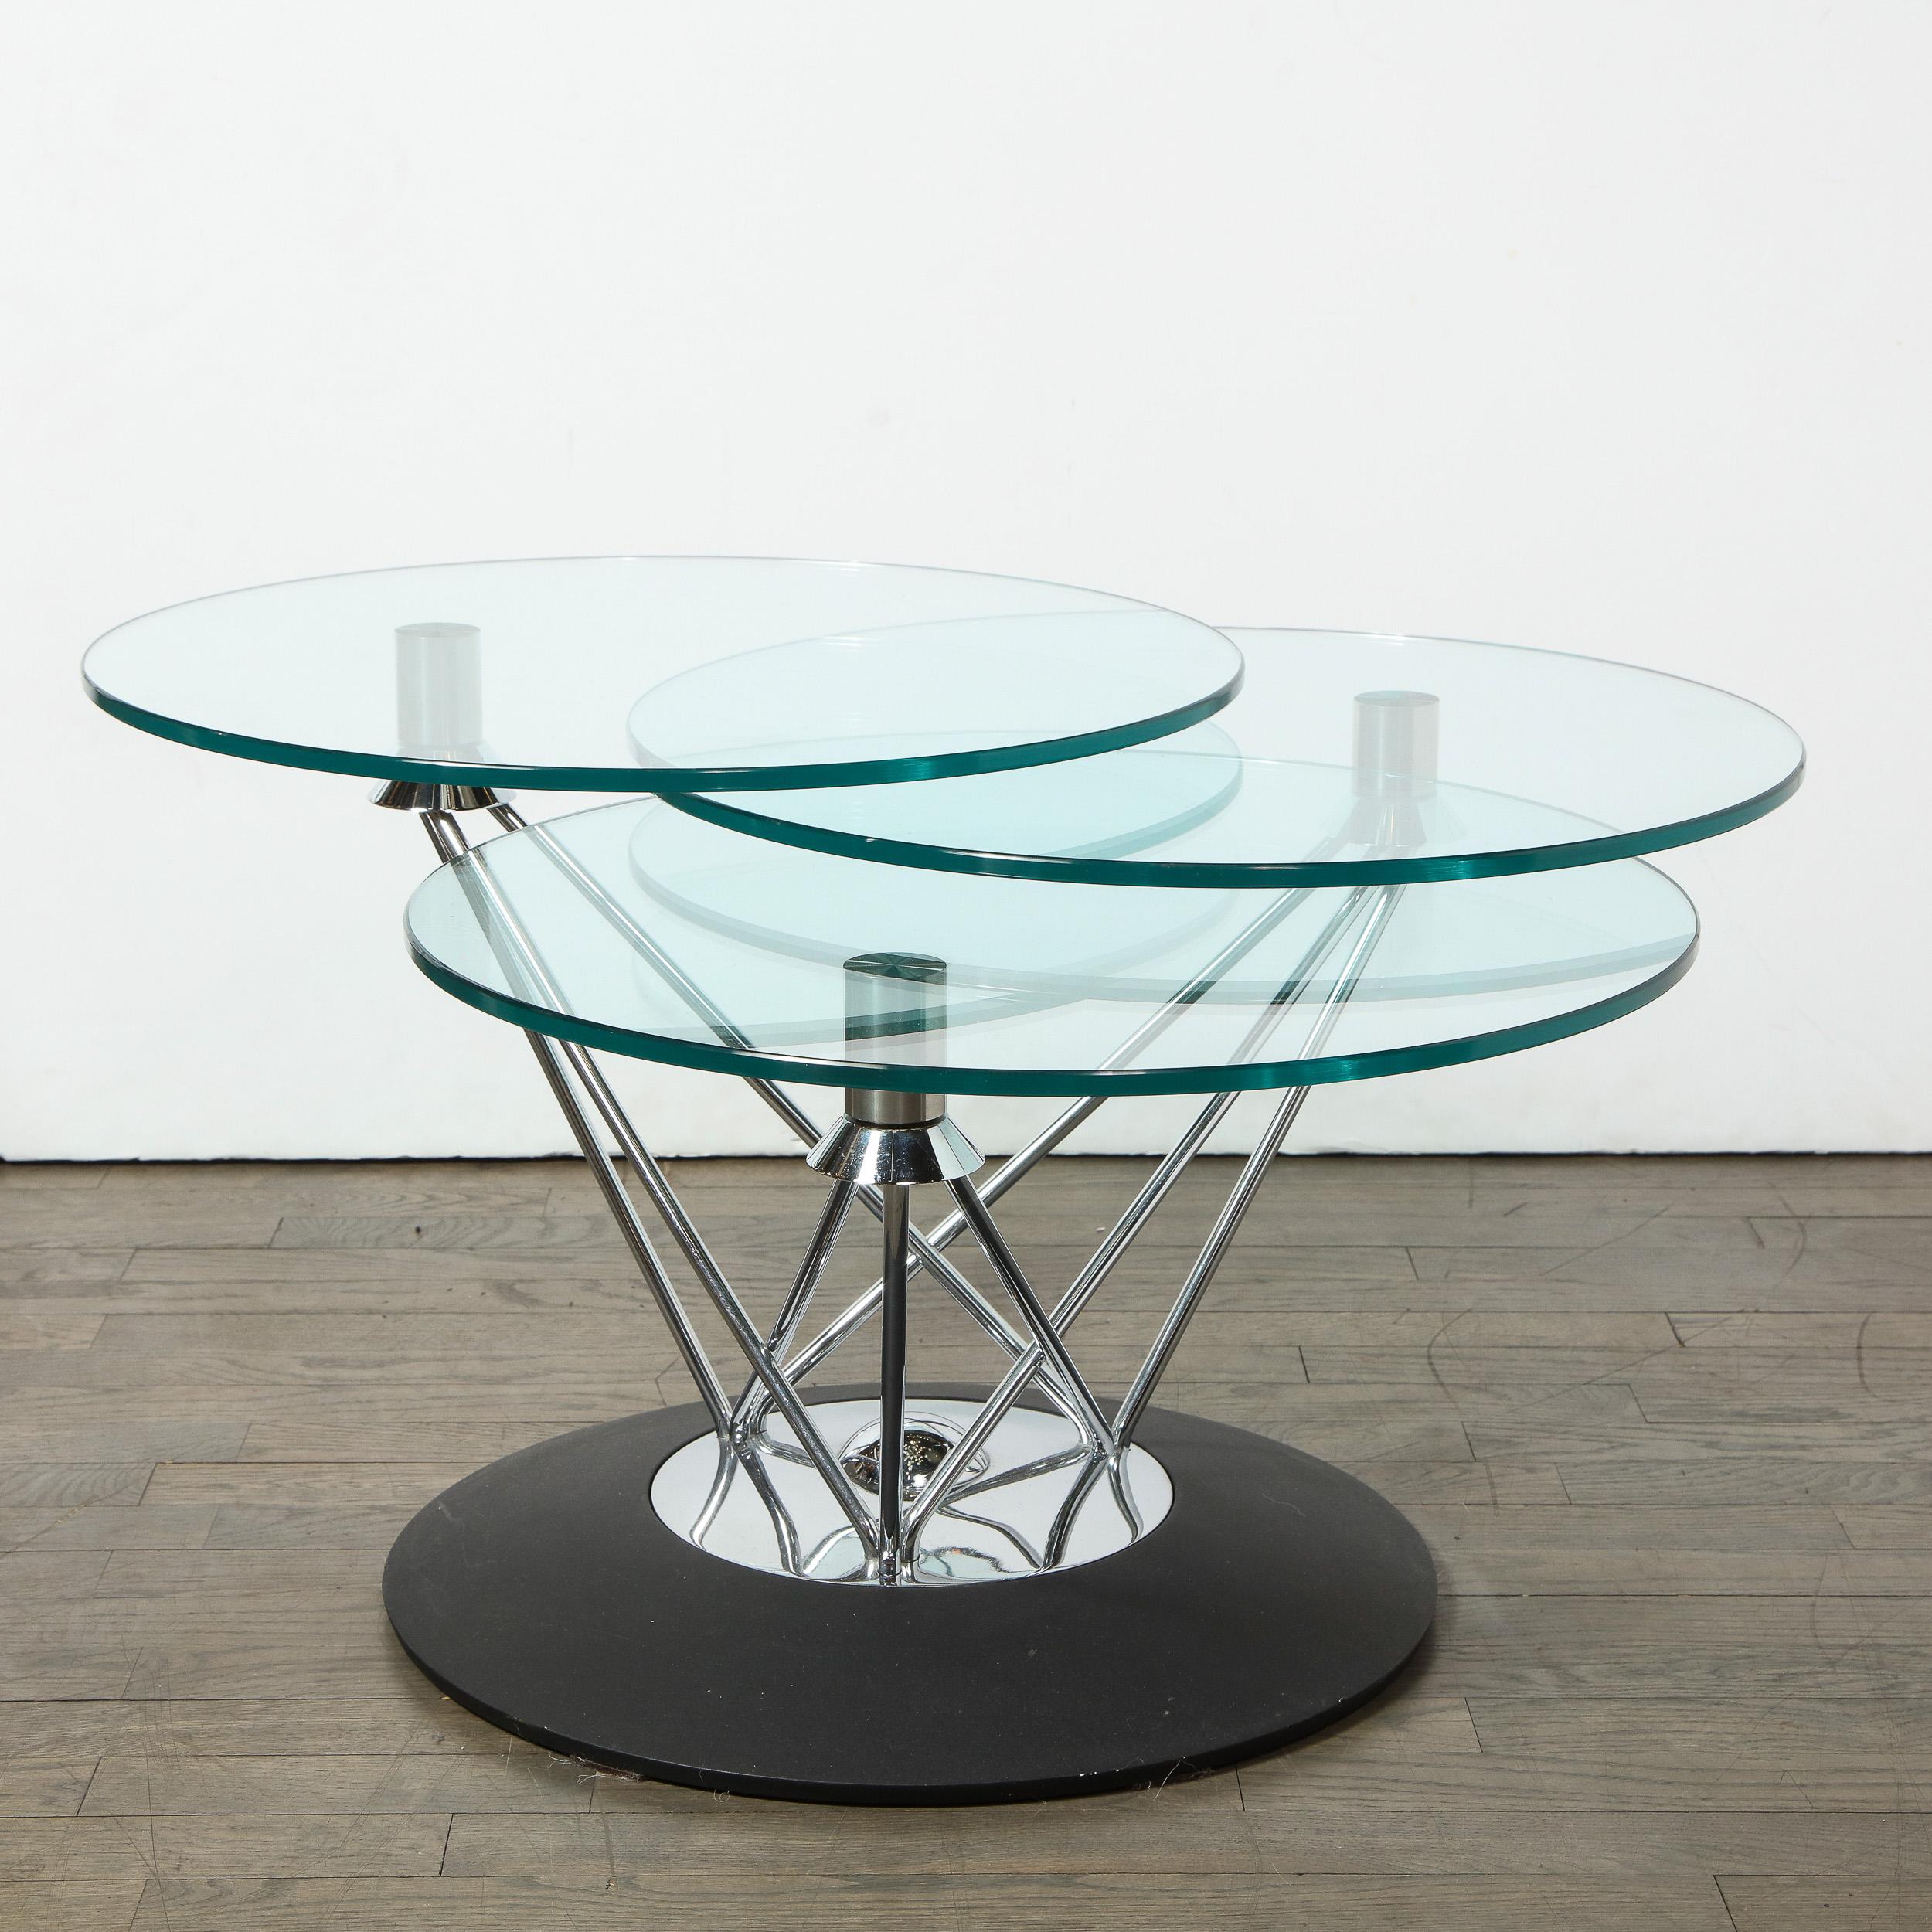 Late 20th Century Mid-Century Modern Adjustable Swiveling Three Tier Chrome & Glass Cocktail Table